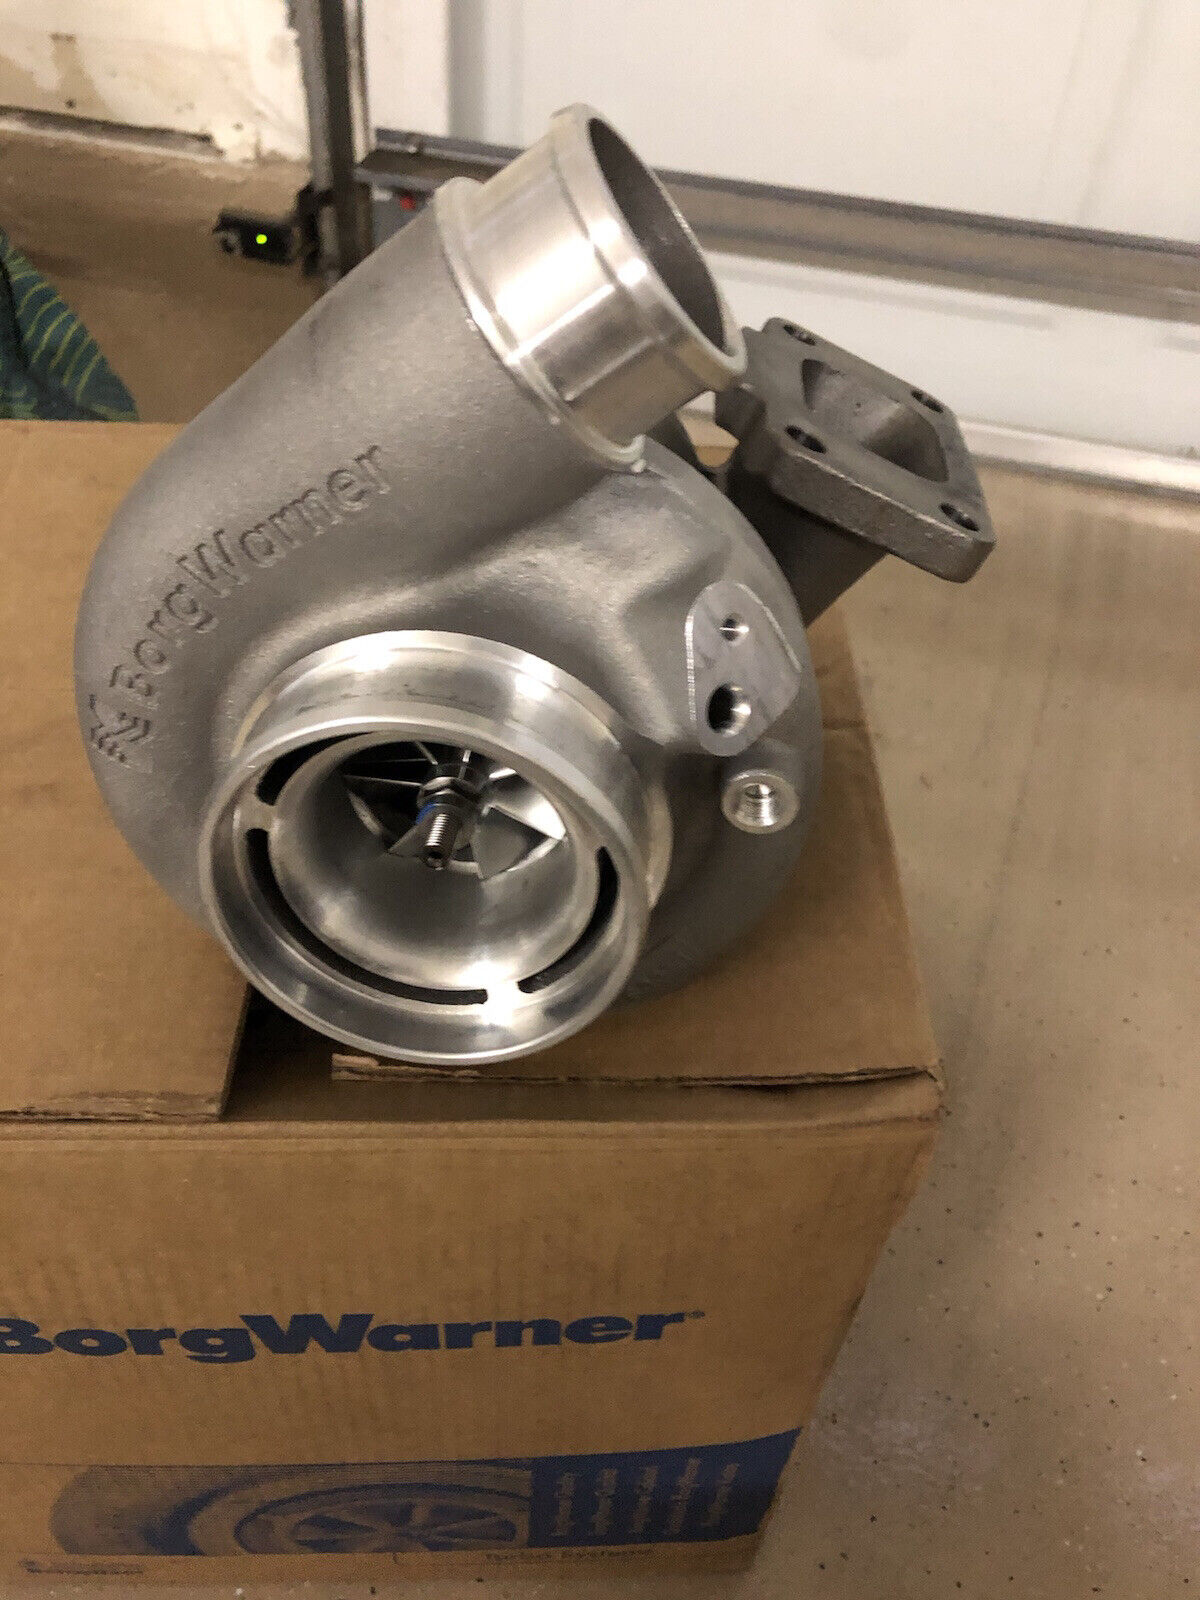 BorgWarner s200sx-e With AGP .63 T3 And 3” Vband Clamps